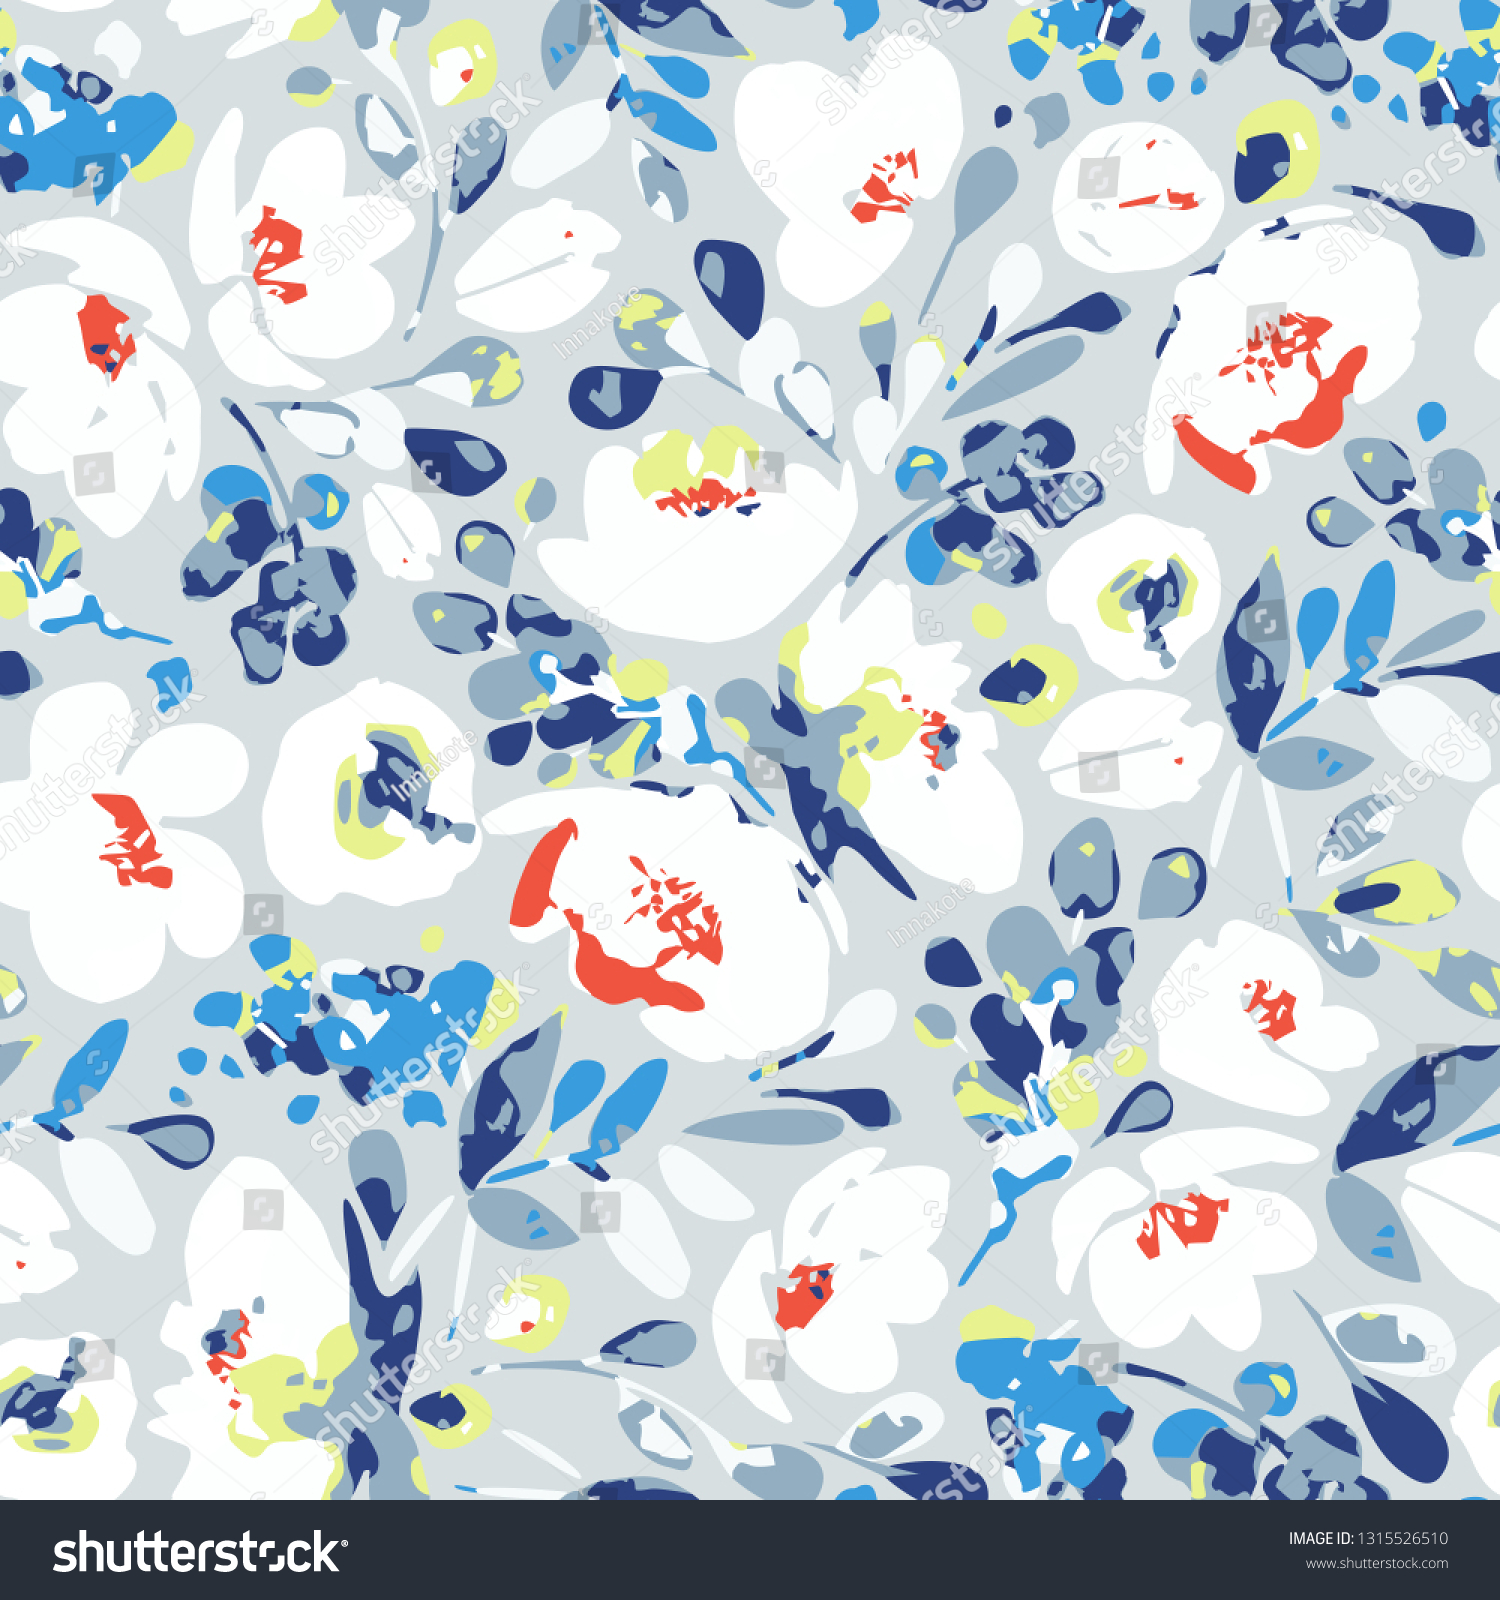 SVG of Vector seamless pattern, blooming abstract white flowers and blue, indigo foliage. Illustration with floral  shapes and spots on navy background. Use in textiles, interior, wrapping paper. svg